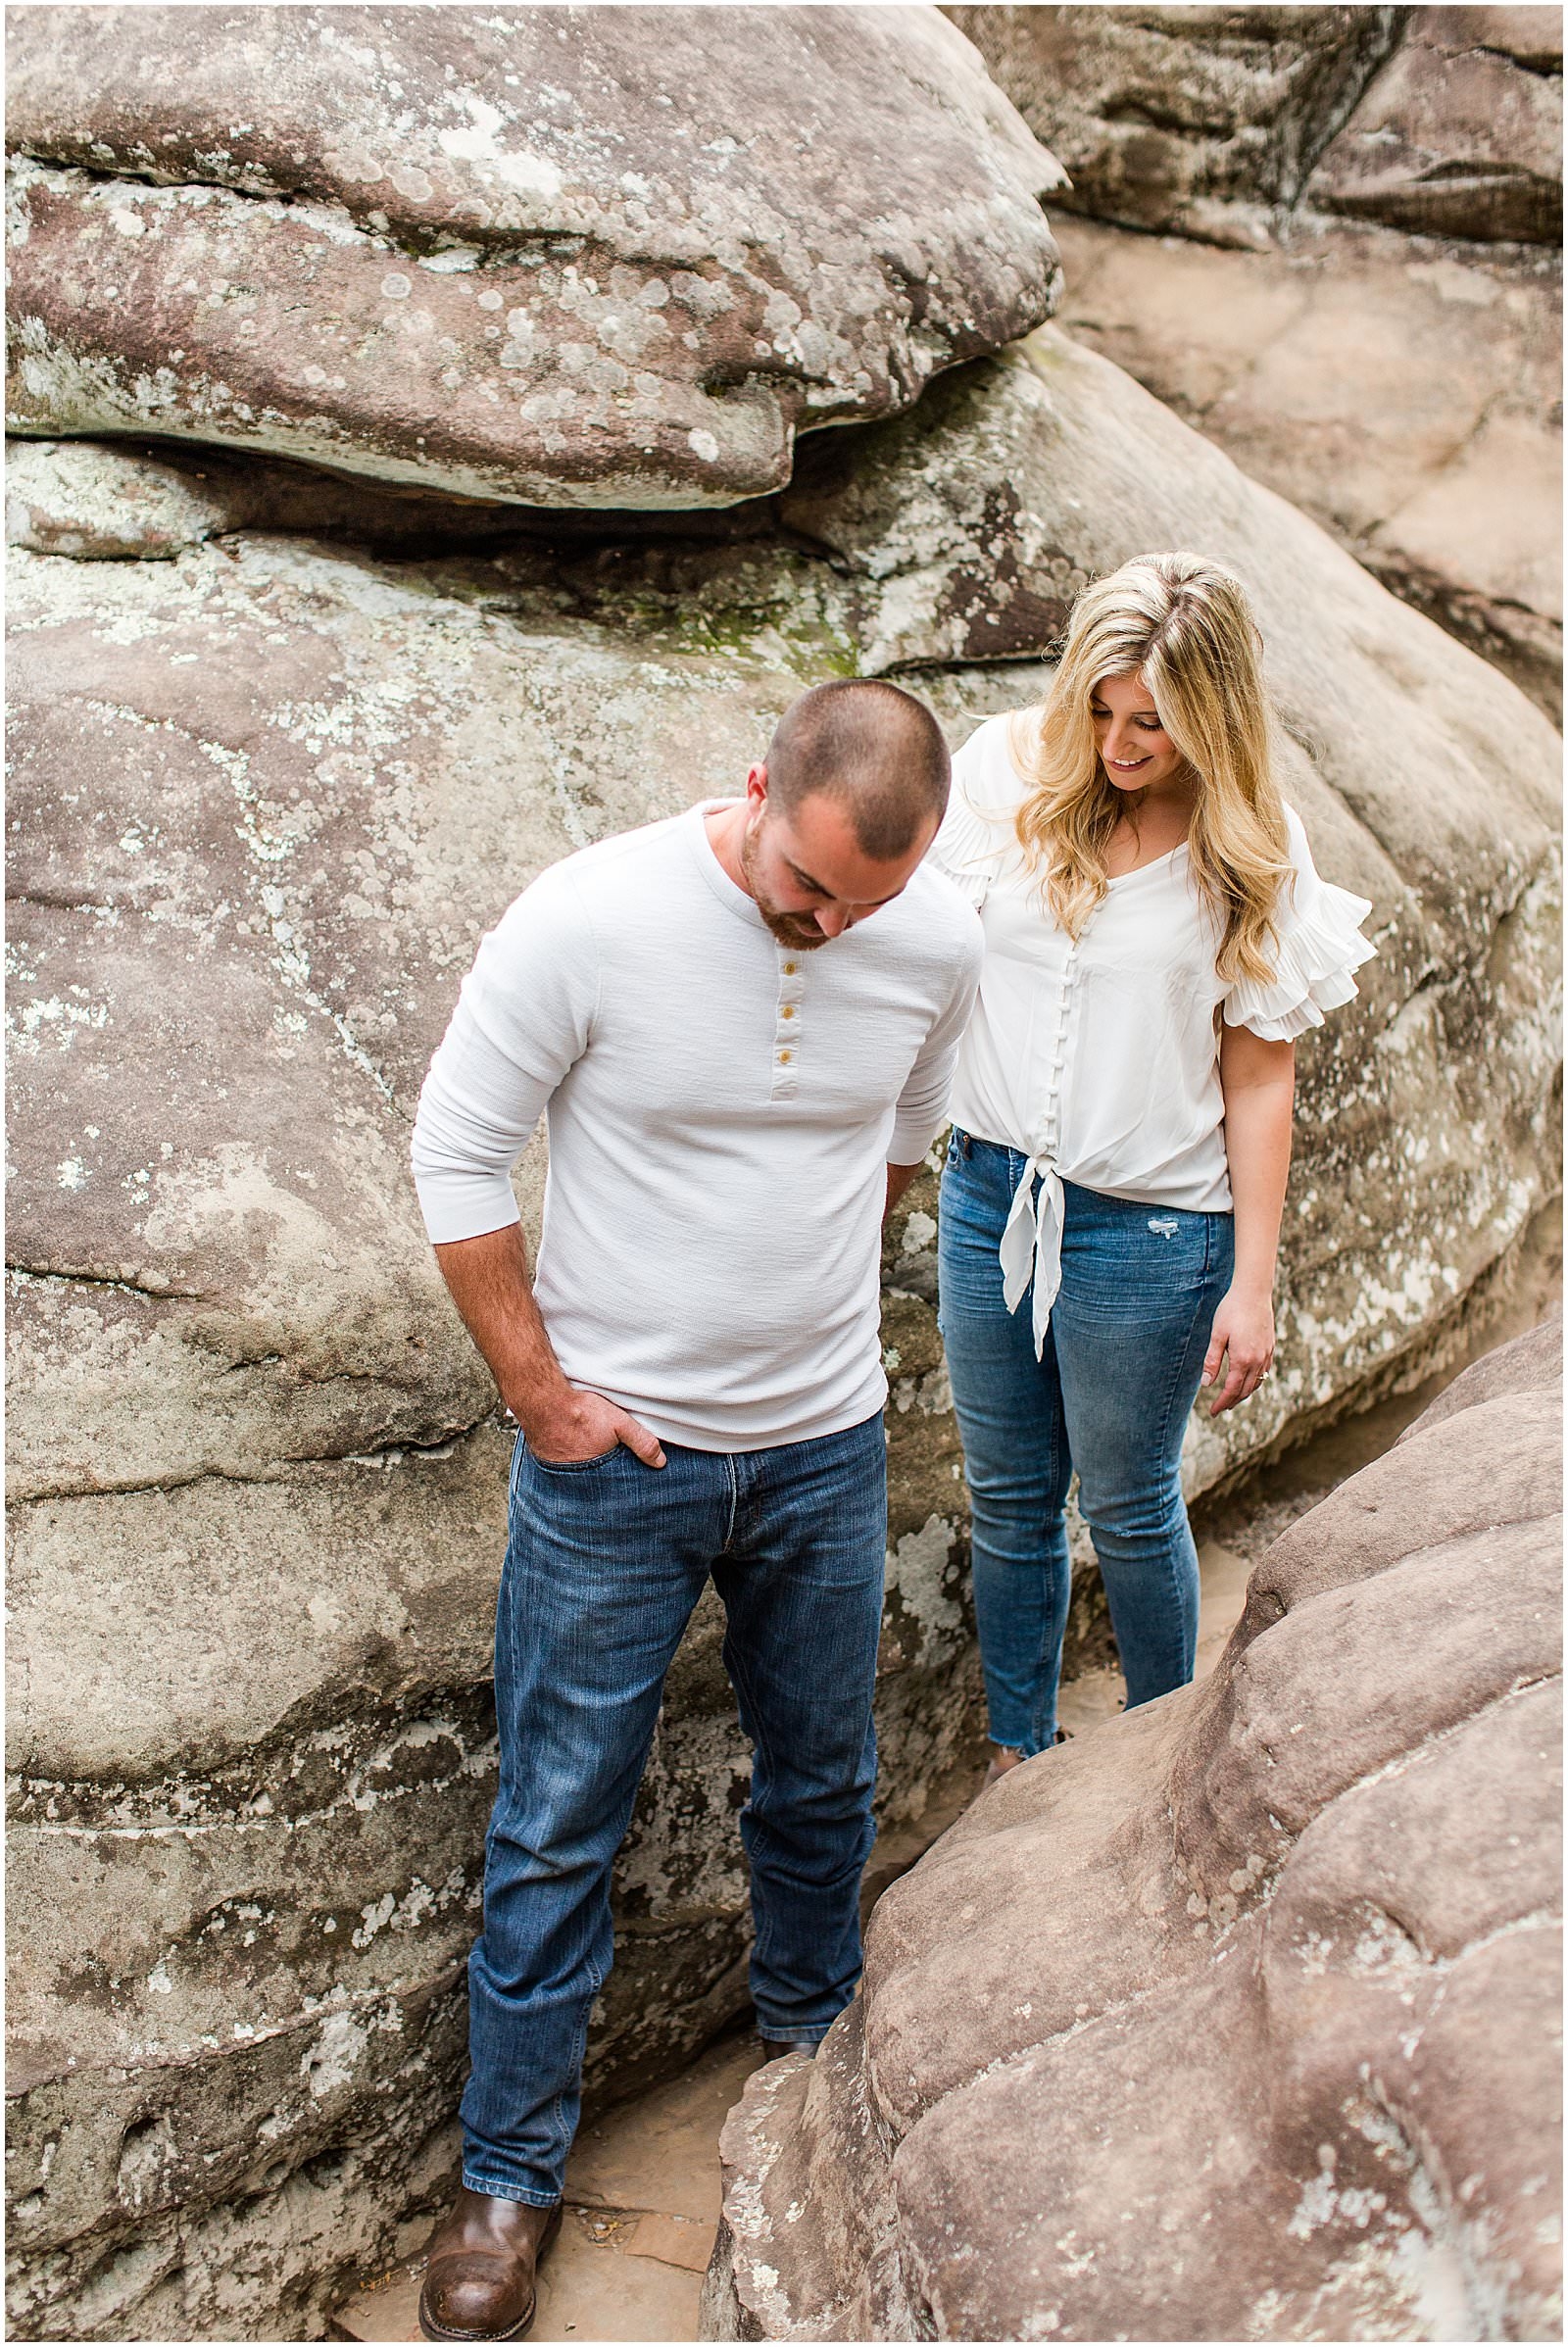 A Garden of the Gods Engagement Session 0019.jpg